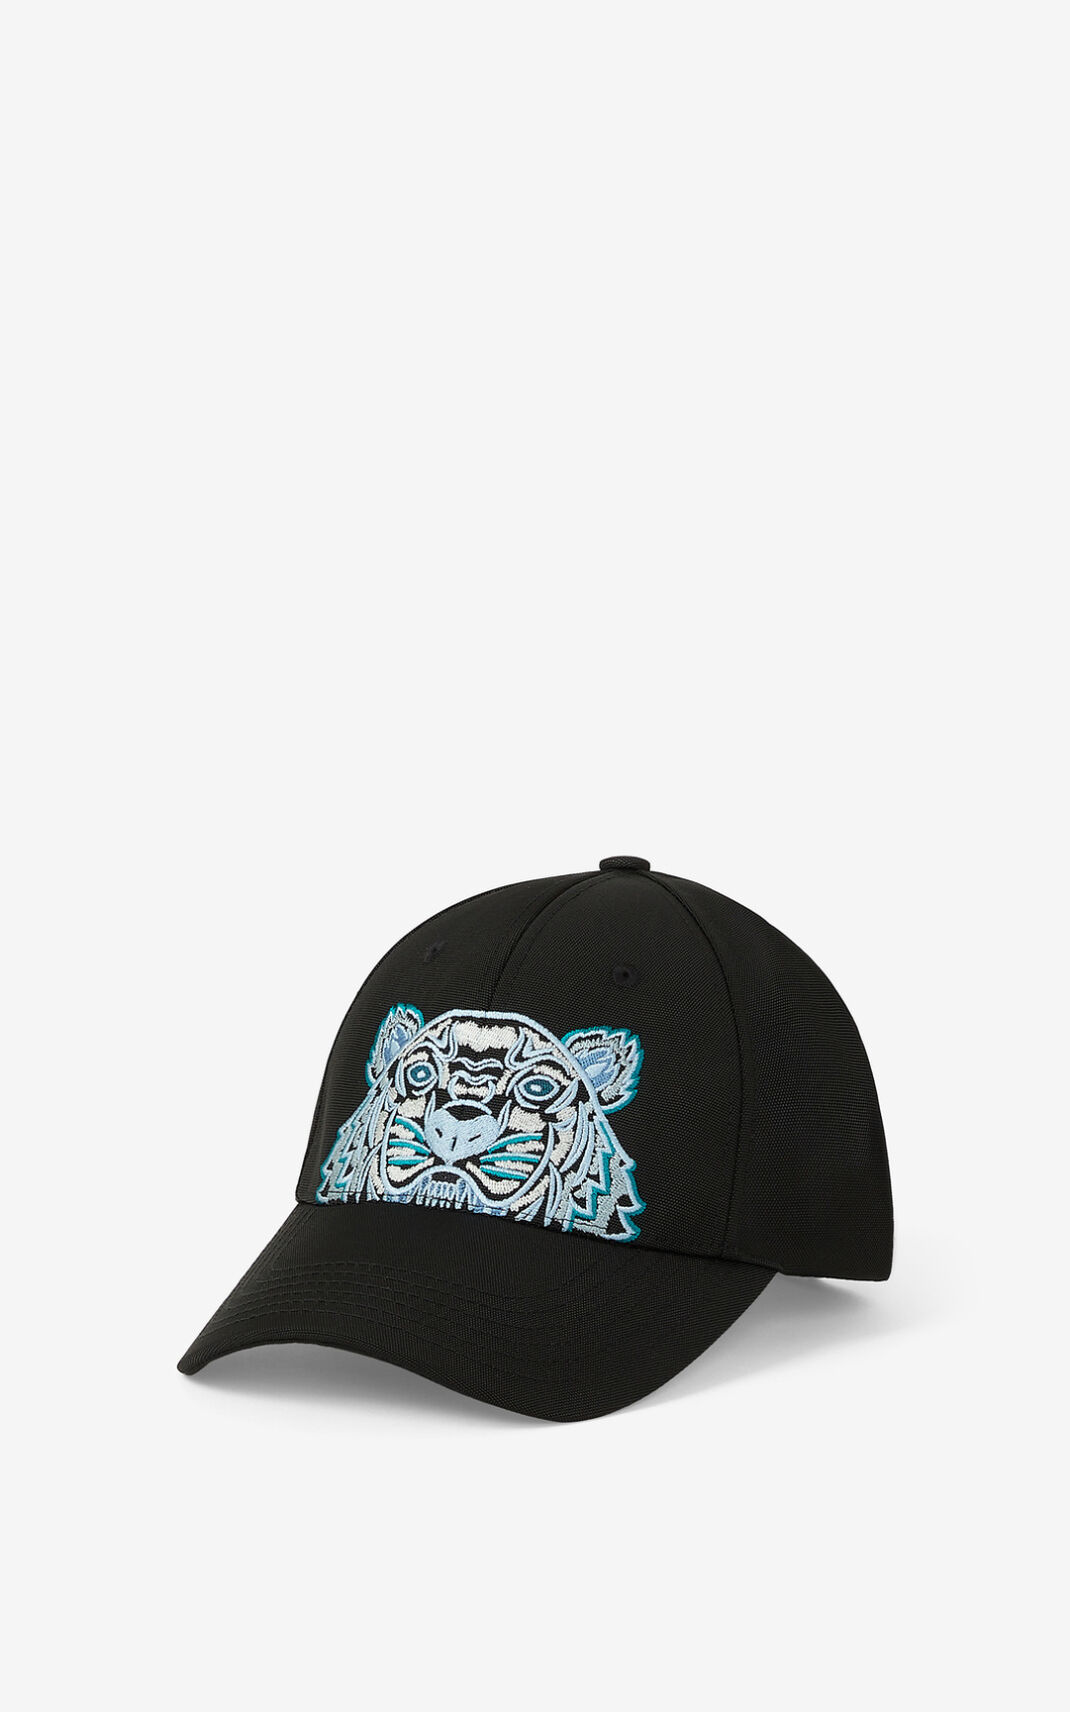 Kenzo Canvas Kampus Tiger Cap Black For Womens 7350ZXSWA